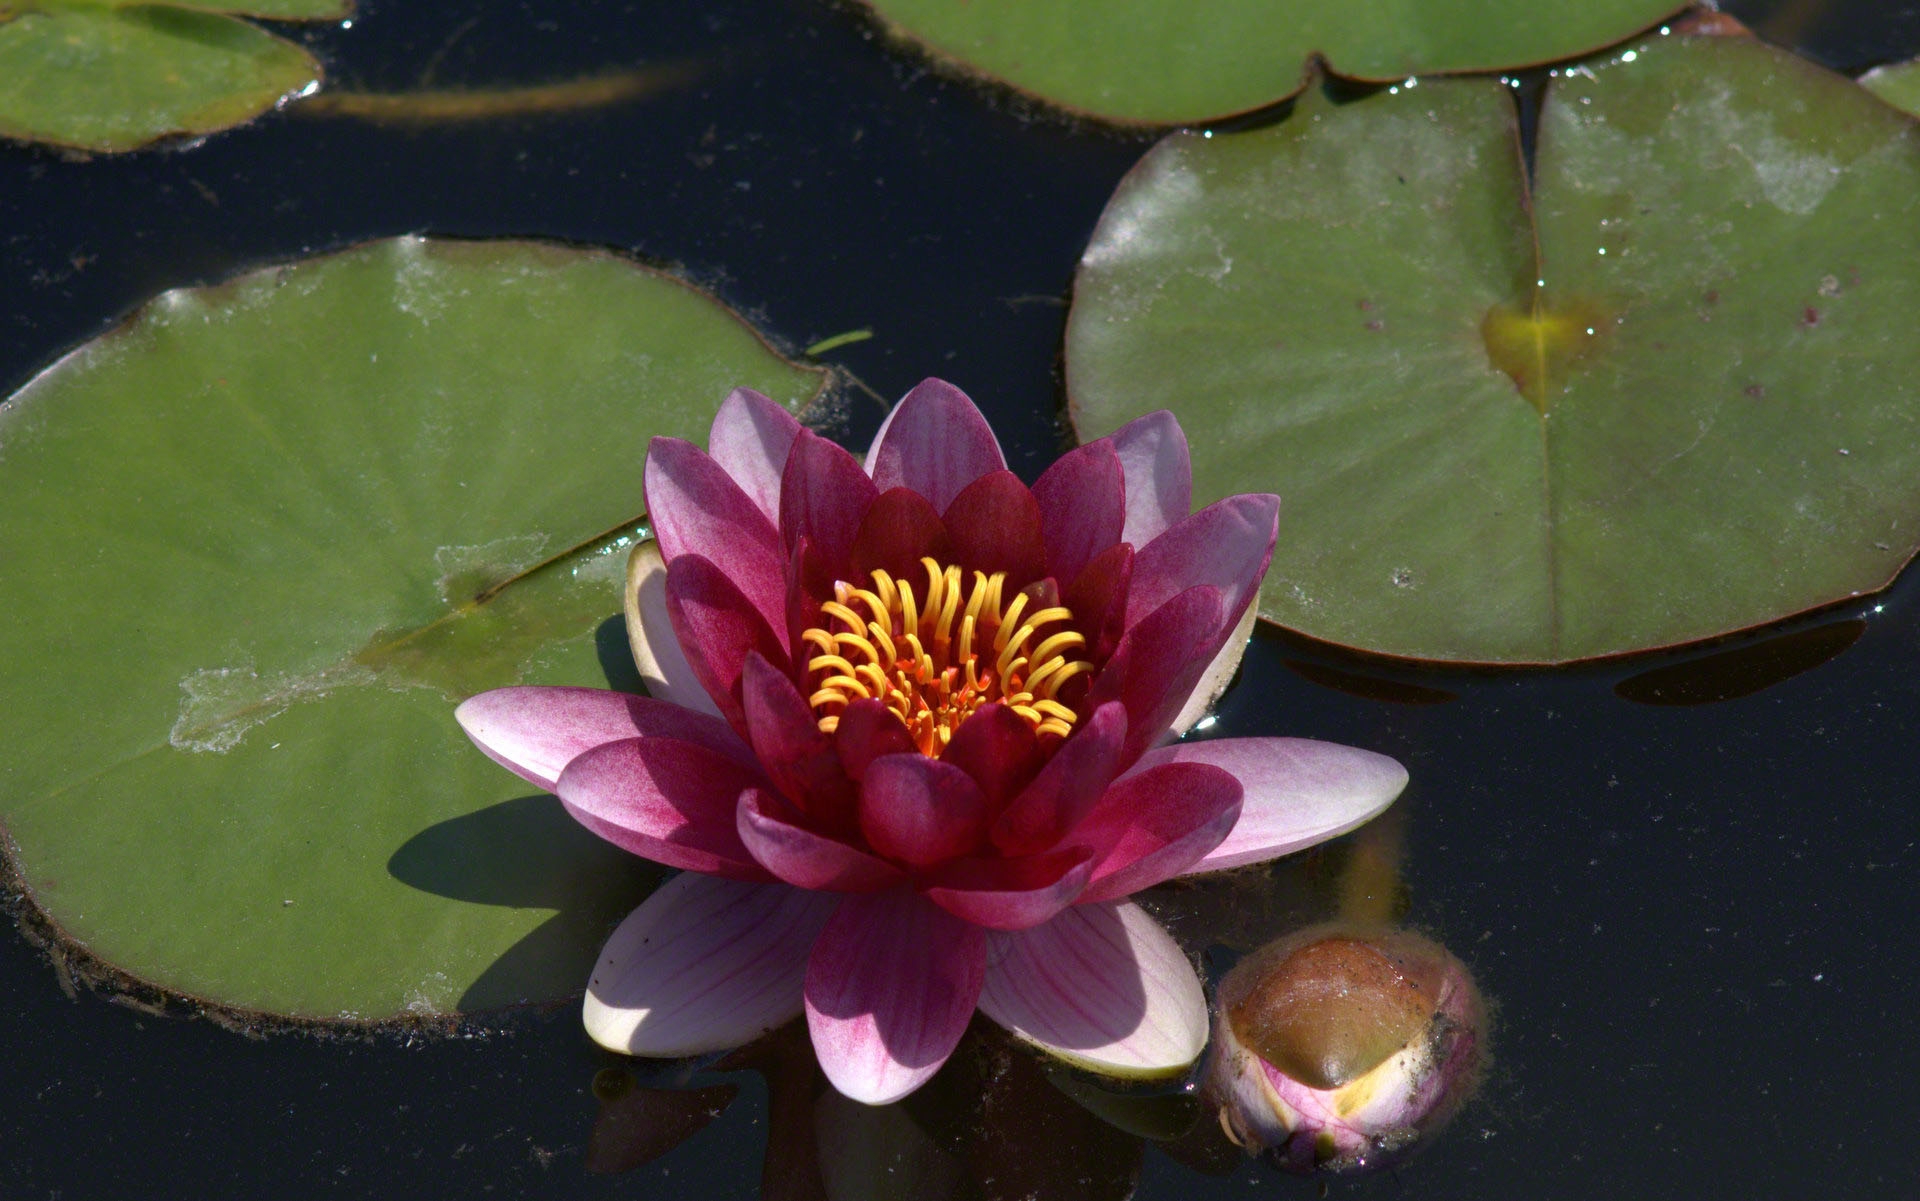 Water Lily 4k